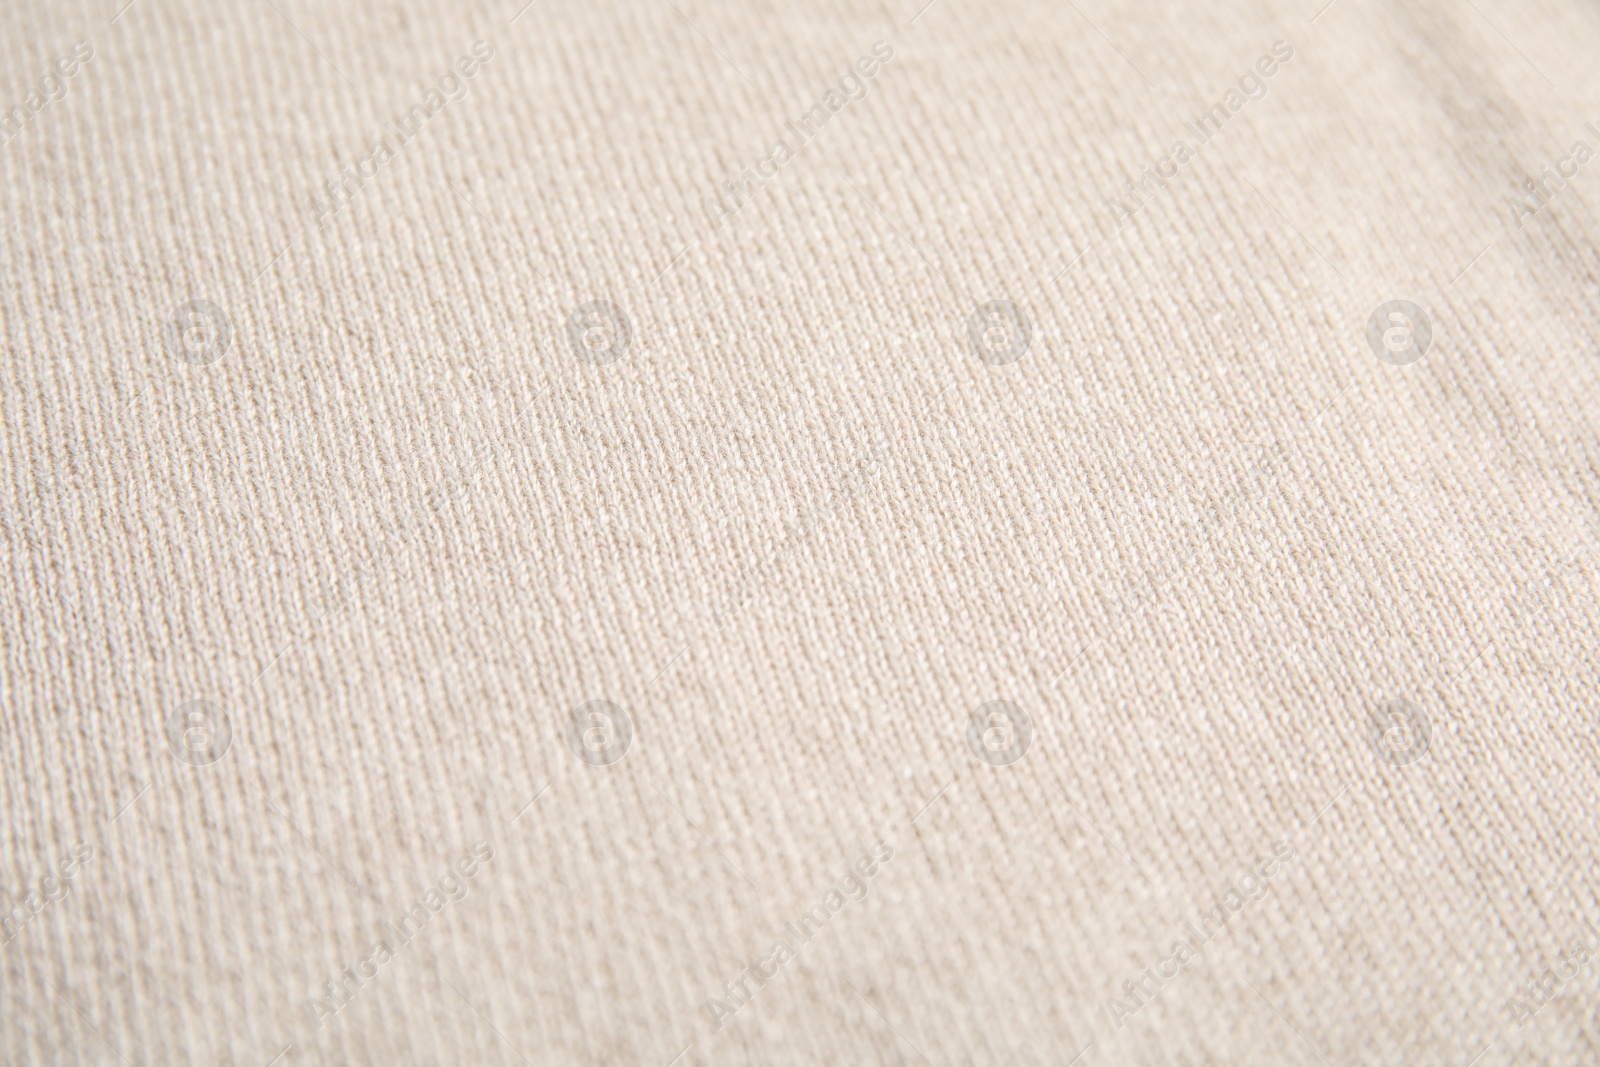 Photo of Warm cashmere sweater as background, top view